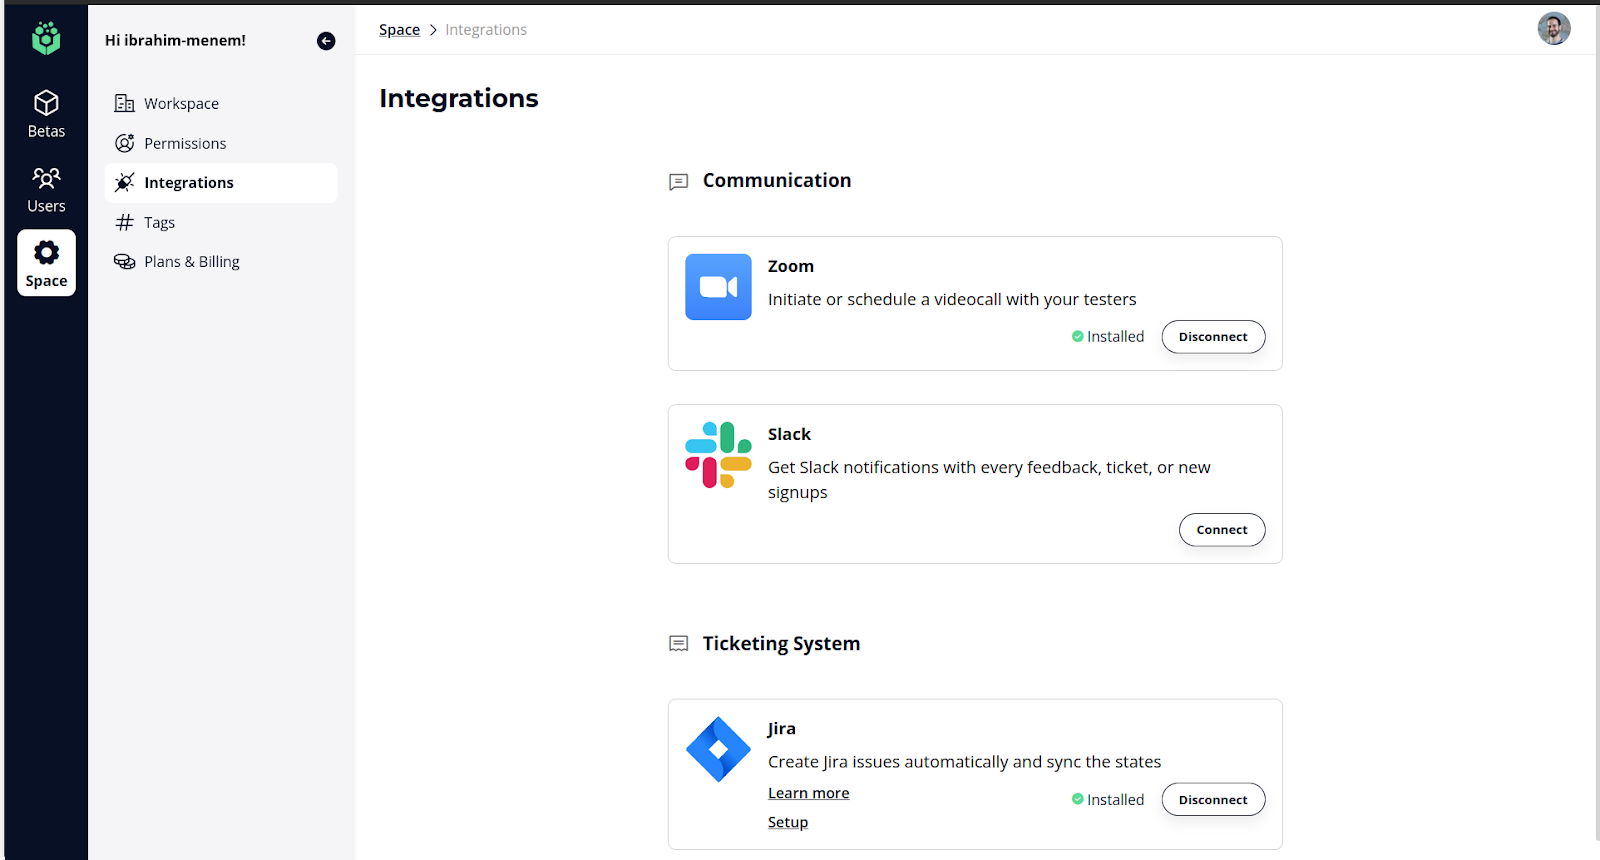 Stay on top of your beta activities using Slack